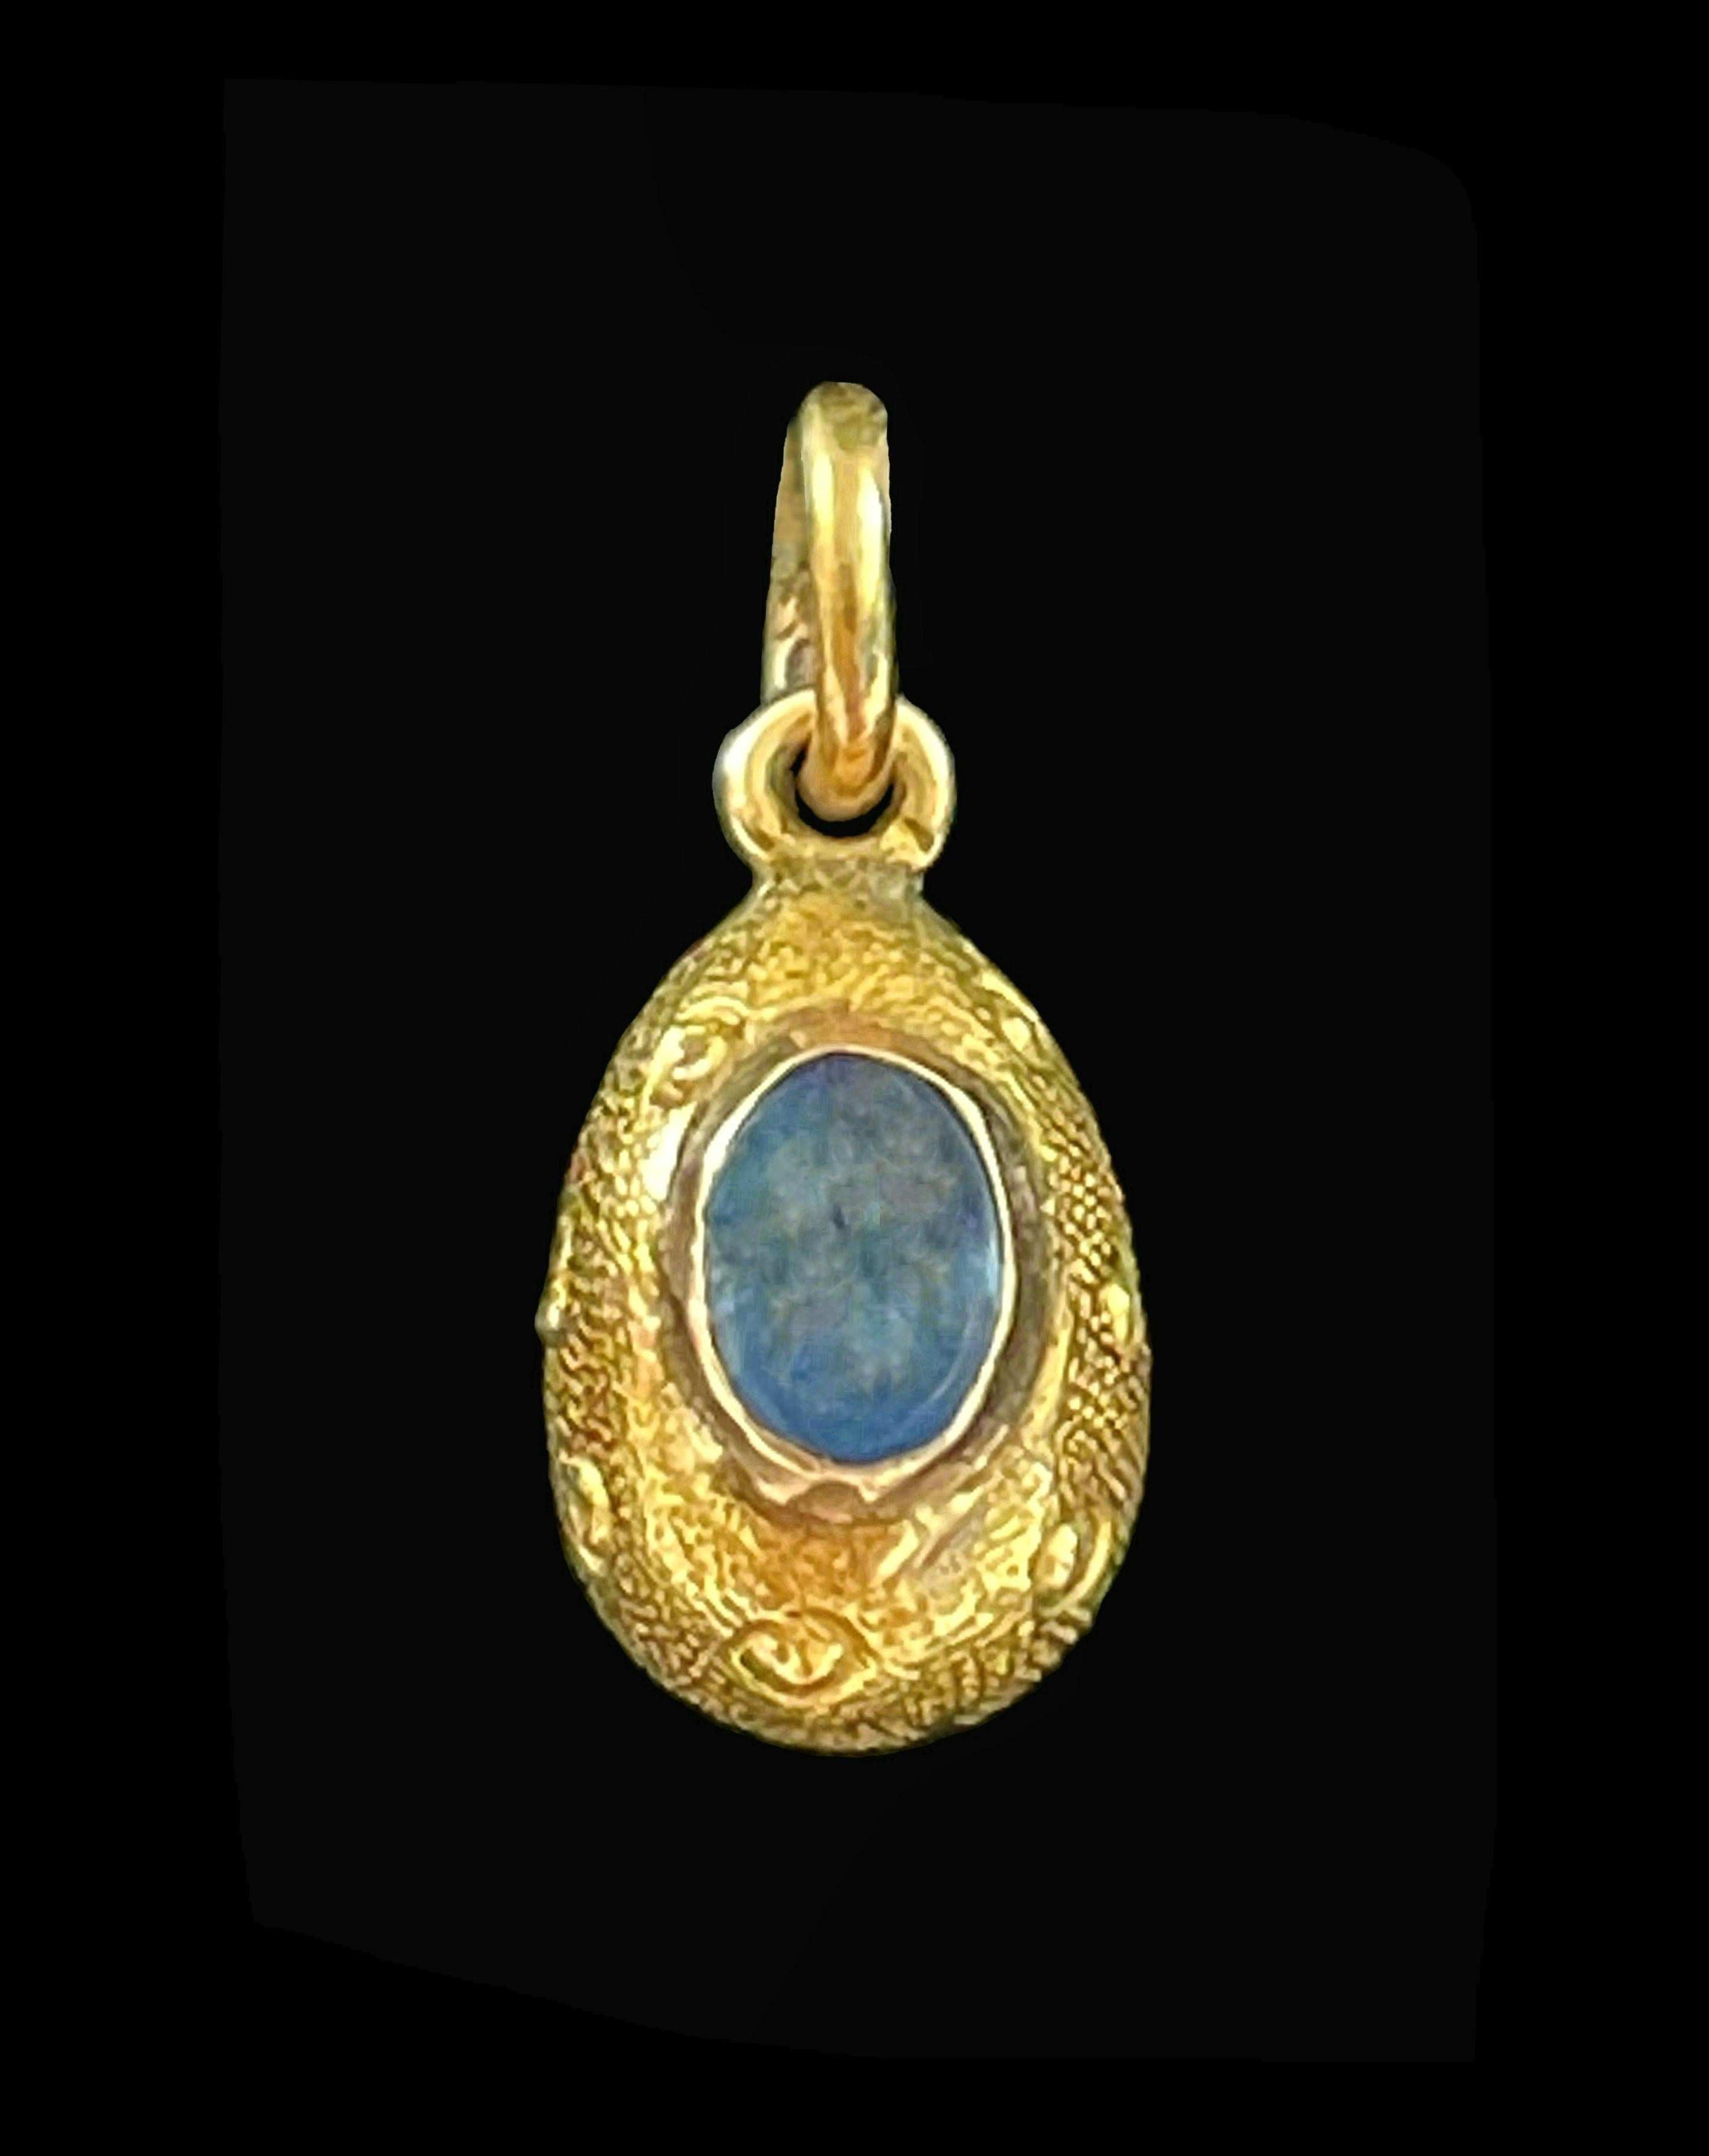 Fine antique 14K yellow gold and cornflower blue Sapphire Easter egg charm or pendant - featuring a bezel set cabochon cut Sapphire (approx. 0.57 Total Carat Weight - 3.5 mm. Wide x 5.0 mm. Long x 3.0 mm. Deep) - the gold body of the egg delicately